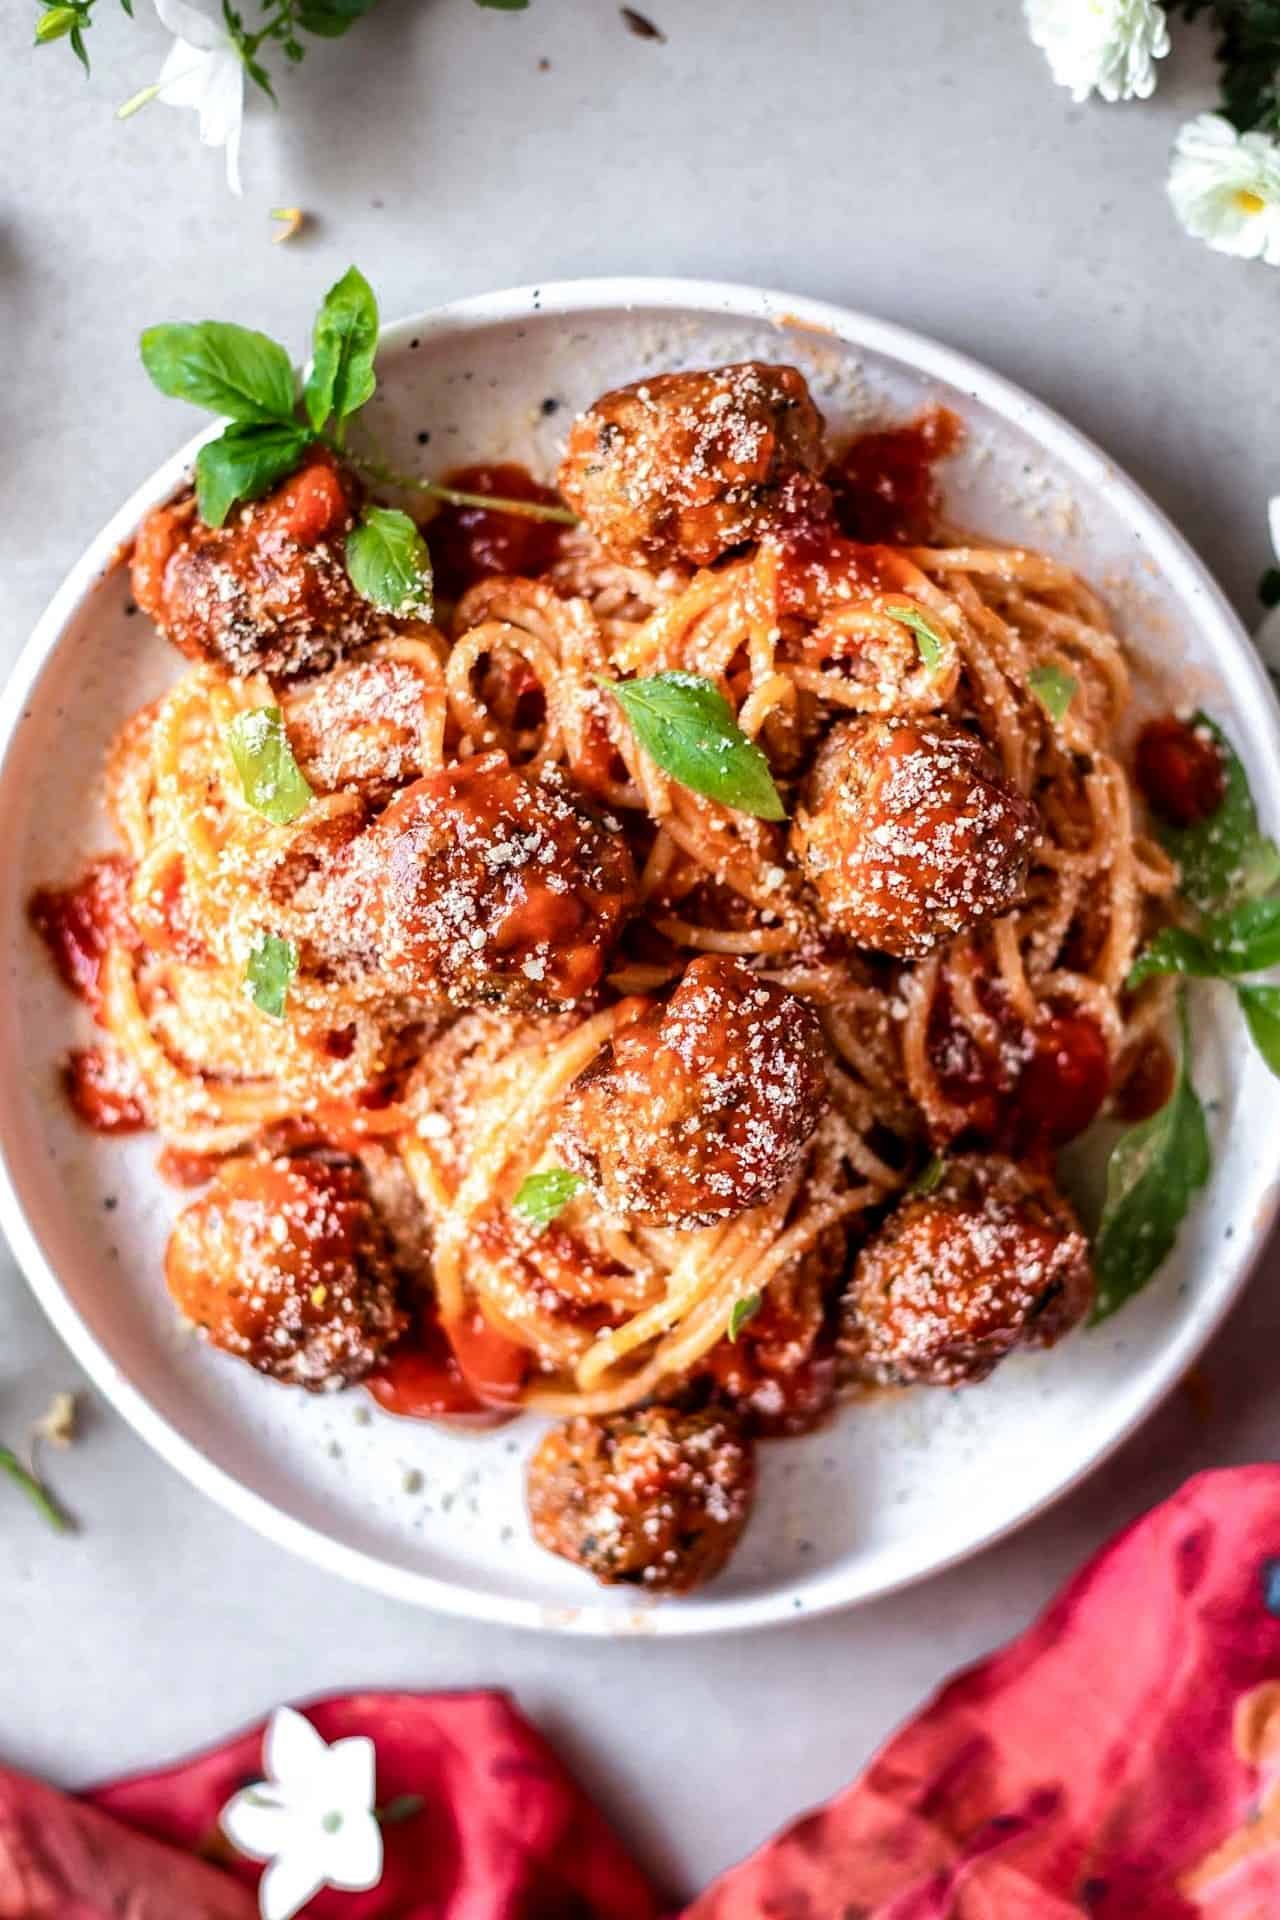 These low FODMAP meatballs are so flavorful, tender on the inside with a crust on the outside, Italian herb-infused, simple to make and super delicious!